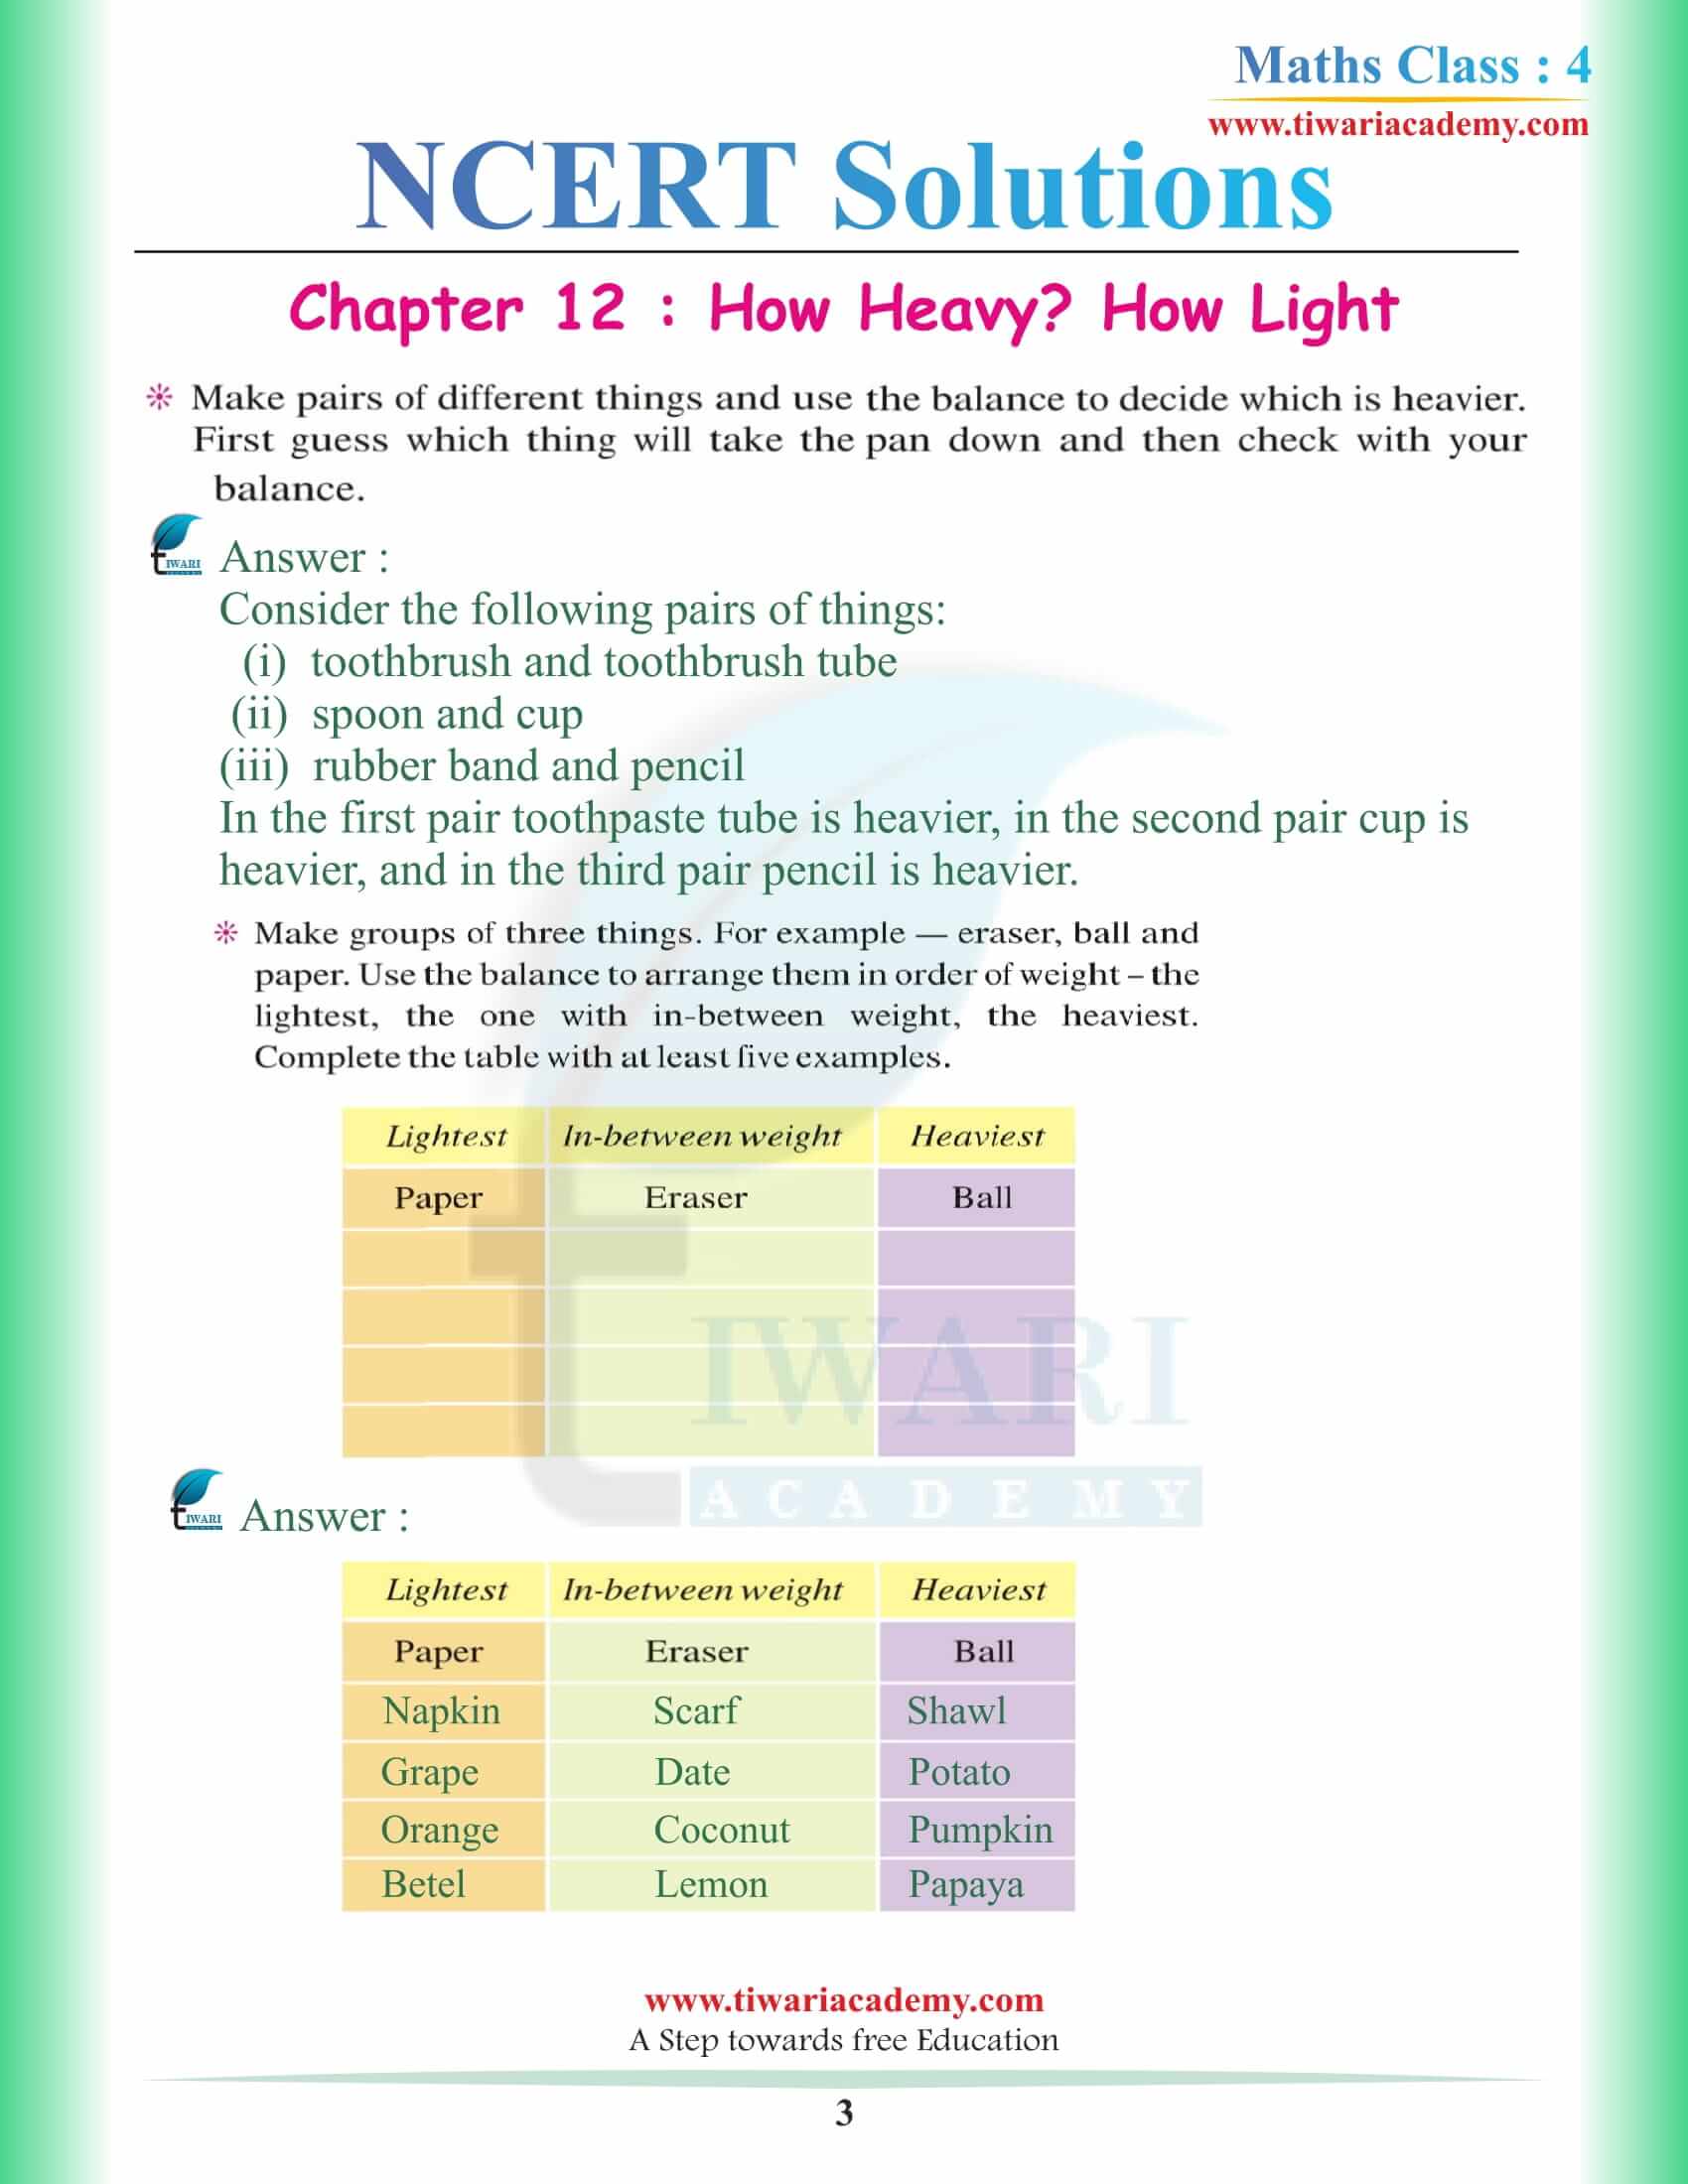 NCERT Solutions for Class 4 Maths Chapter 12 in PDF